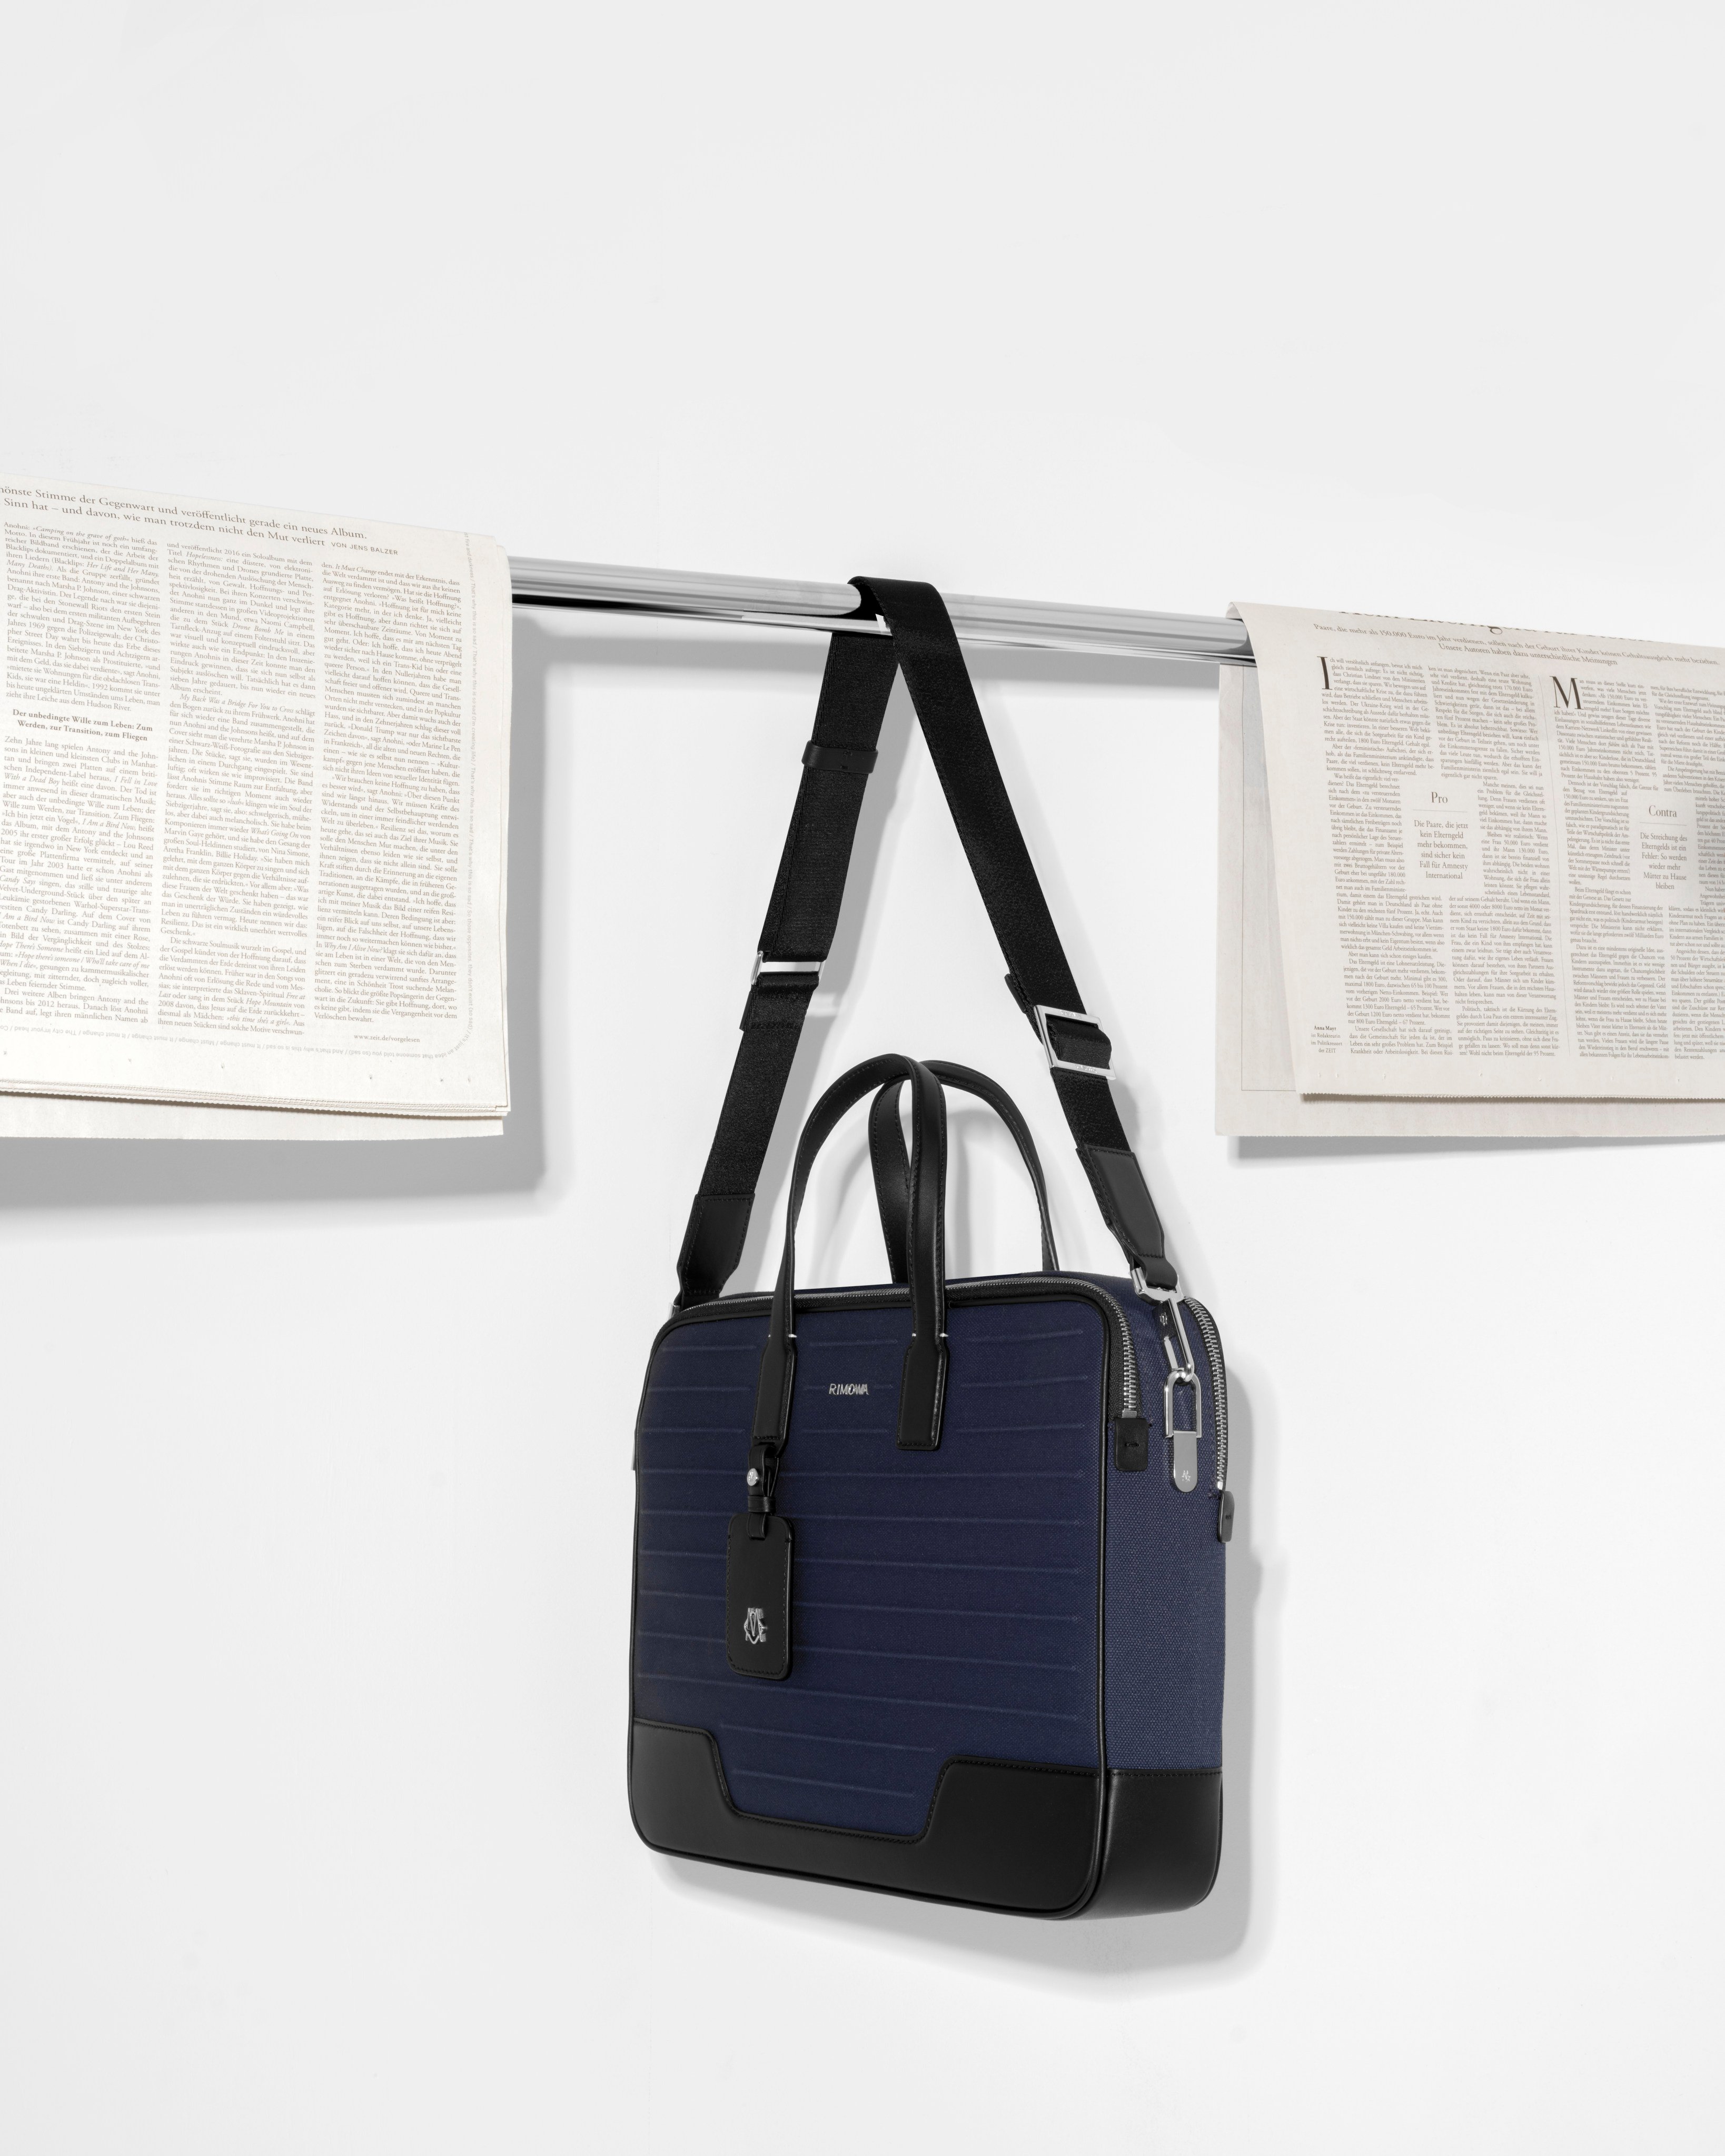 Delvaux's Magritte Collaboration Expands its Offering of Men's